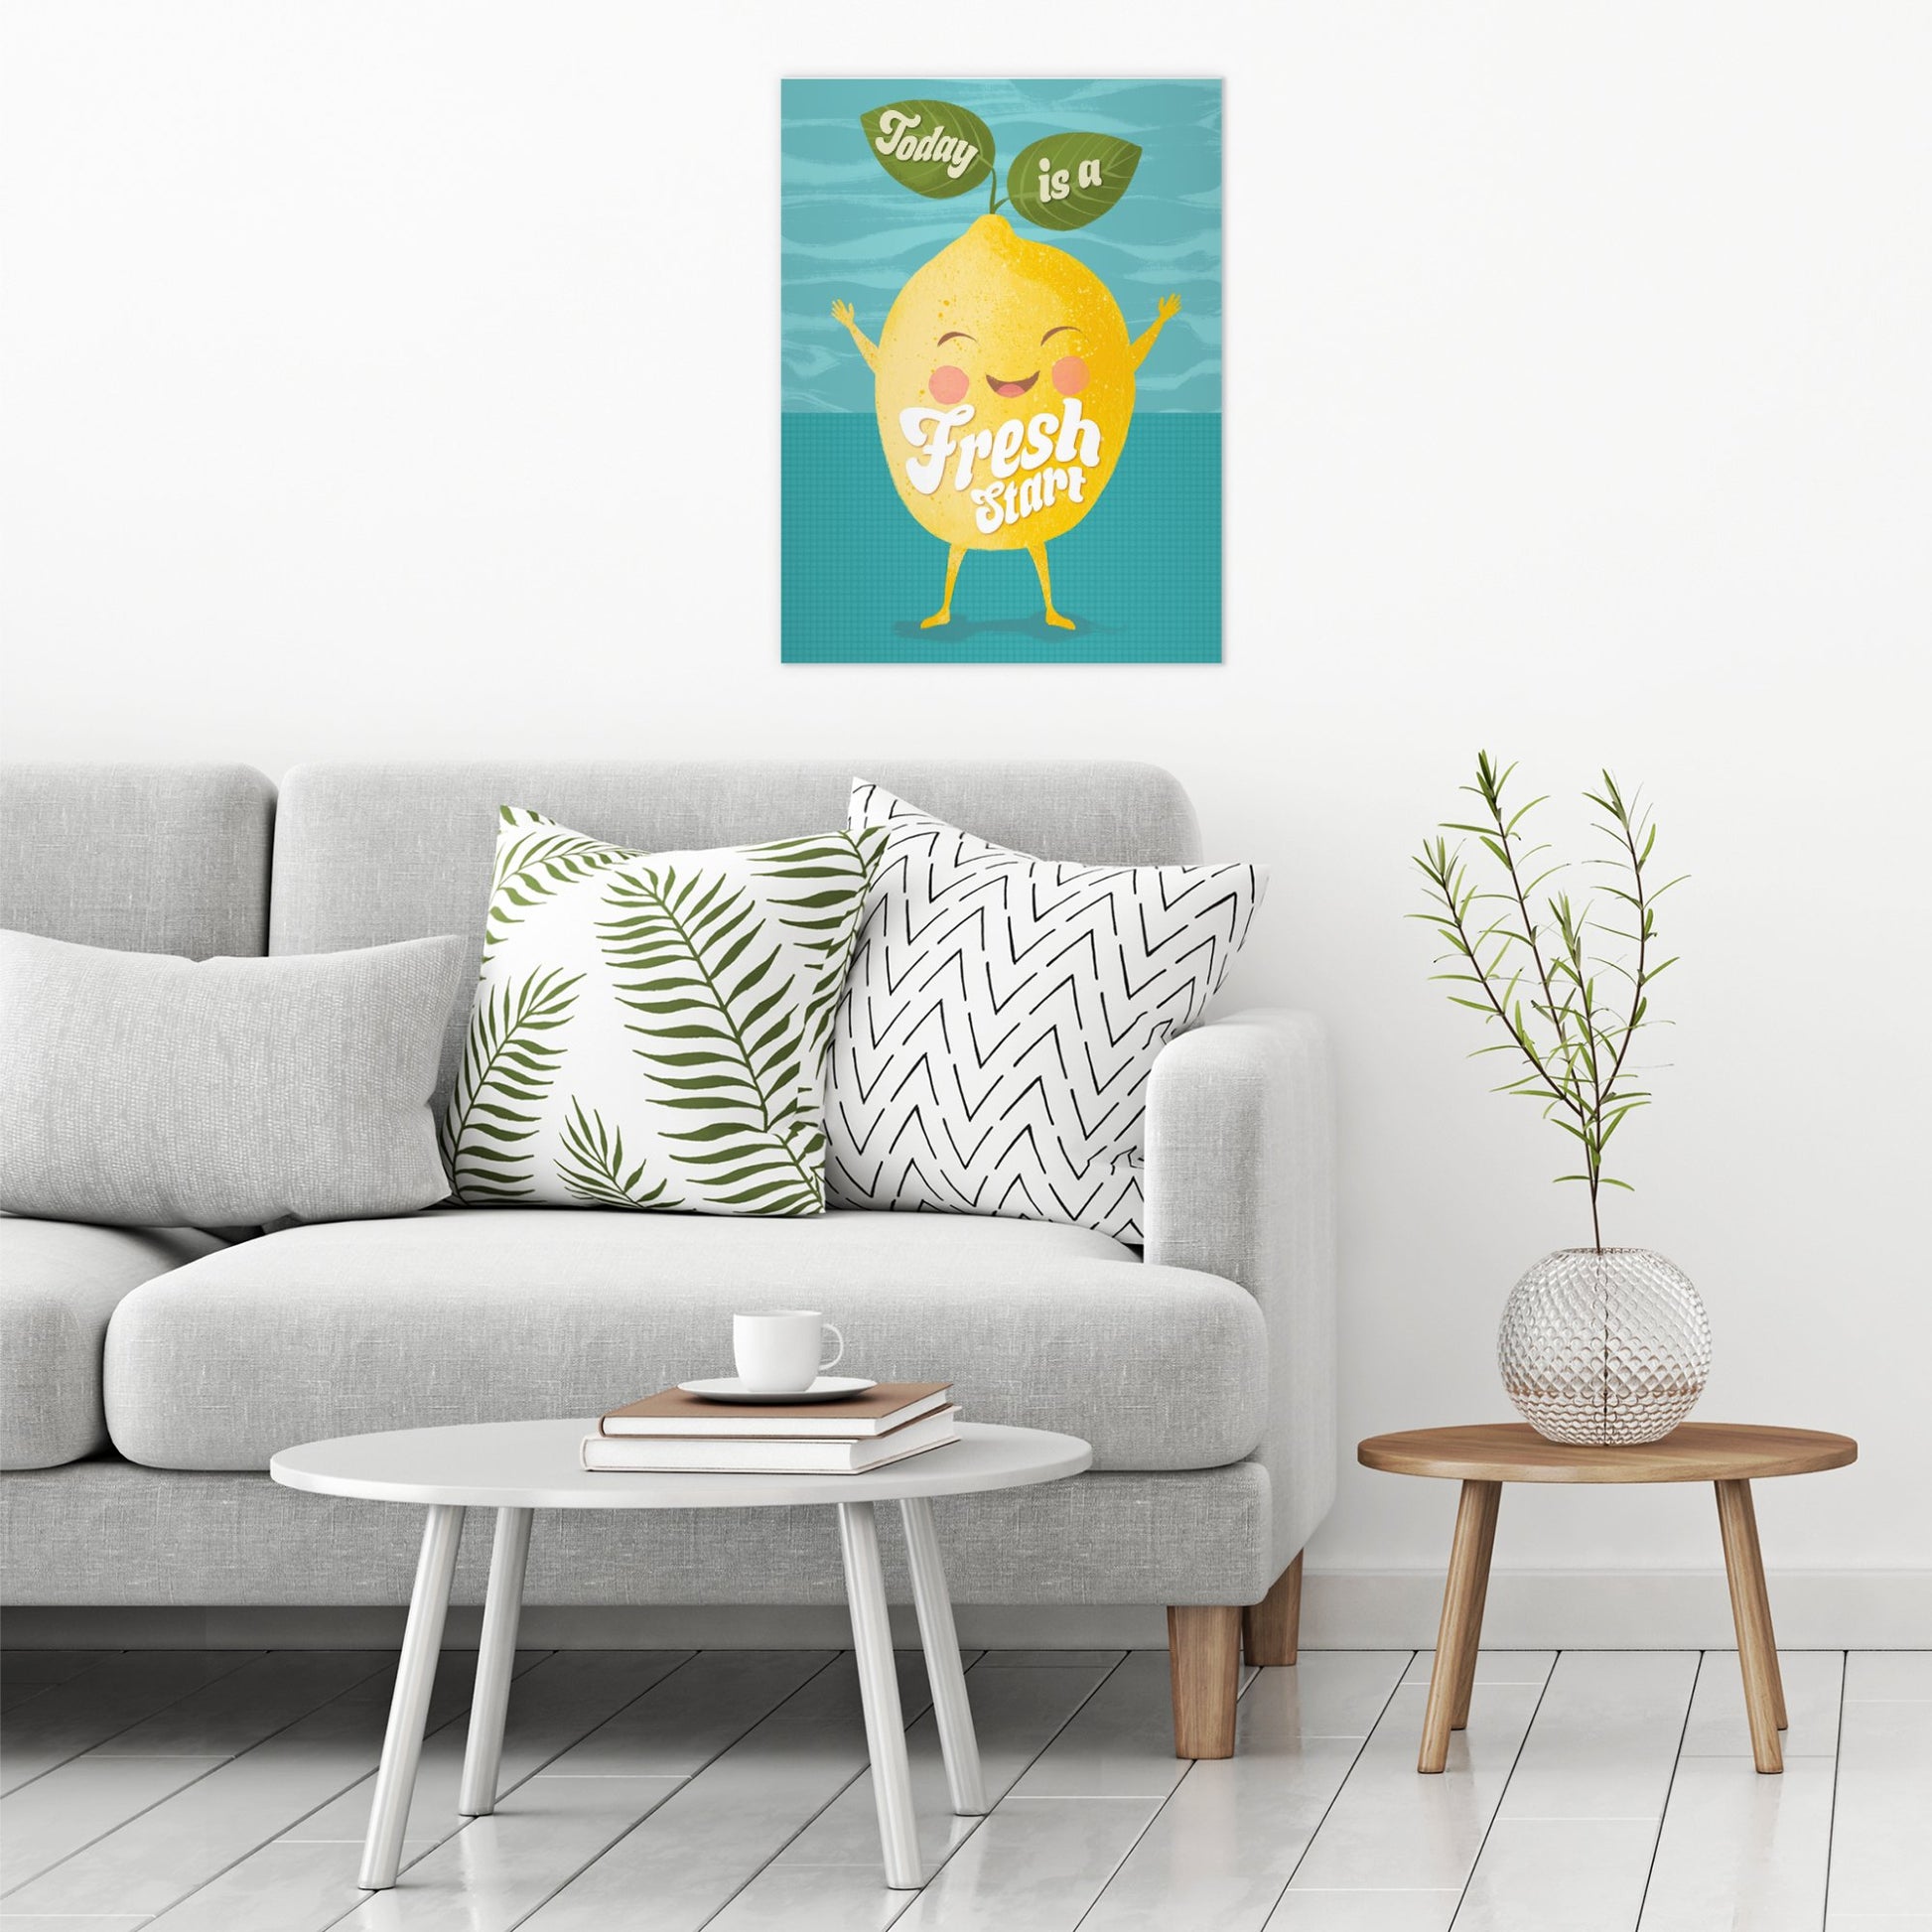 A contemporary modern room view showing a large size metal art poster display plate with printed design of a Cute Lemon Quote 'Today is a Fresh Start'